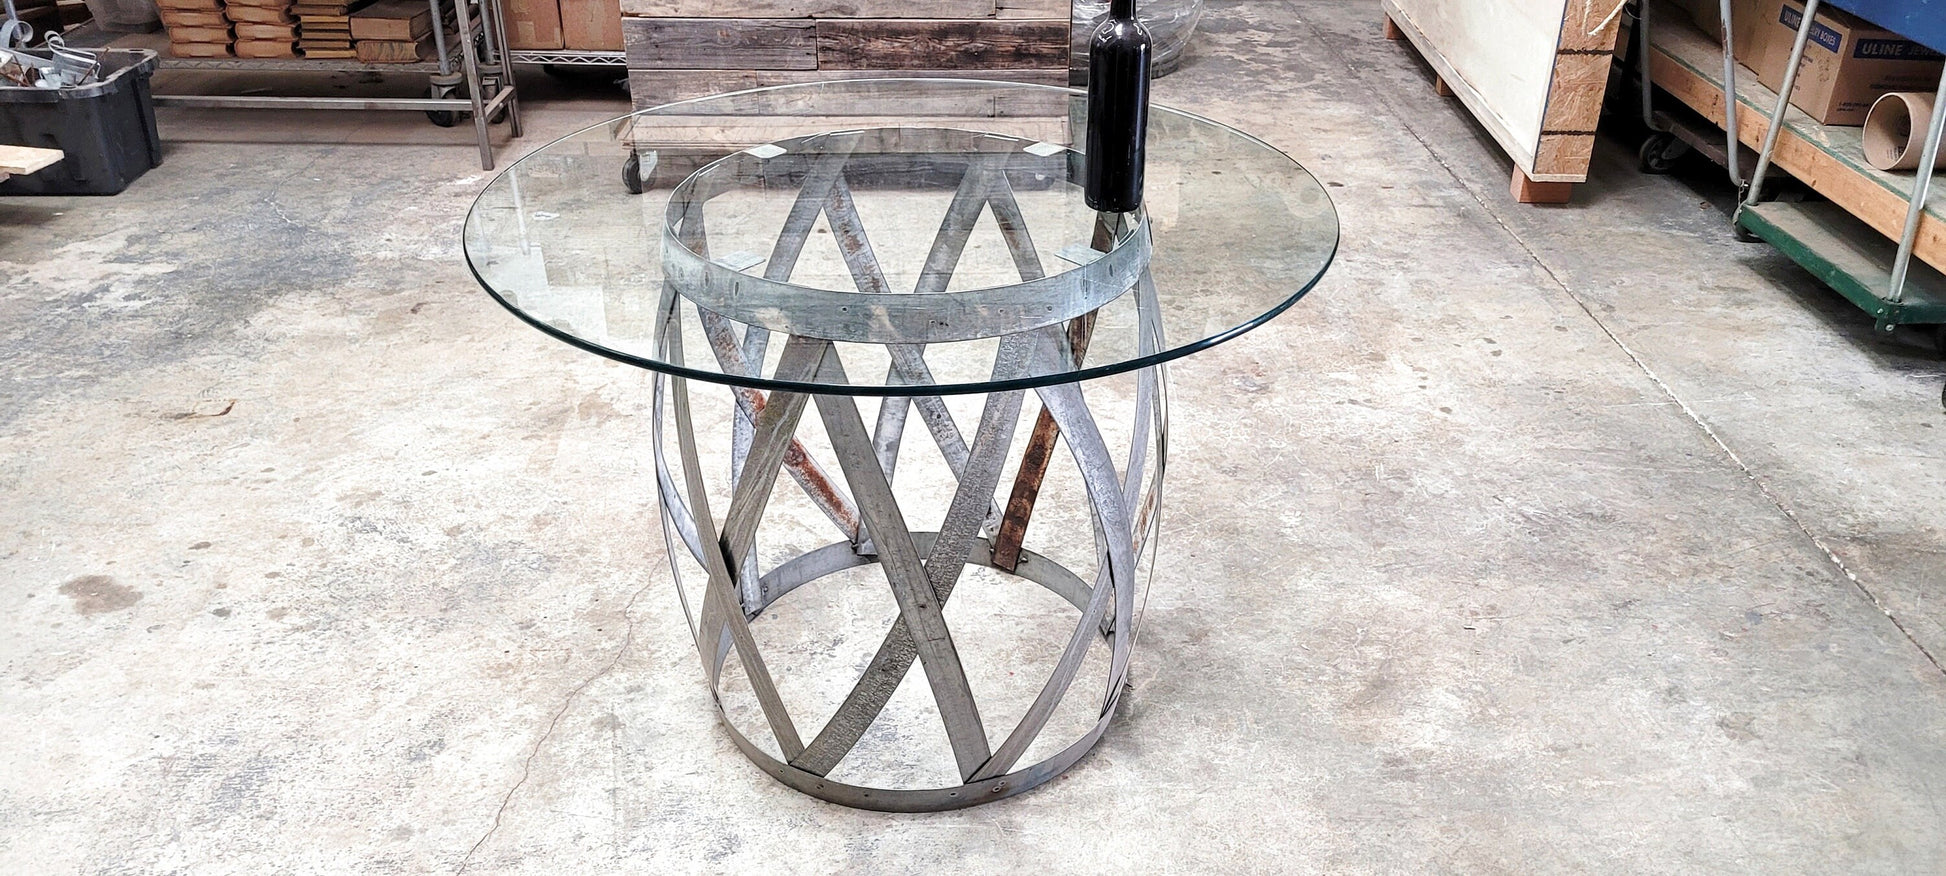 Wine Barrel Ring Dining Table - Perron - made from retired Napa wine barrel rings 100% Recycled!